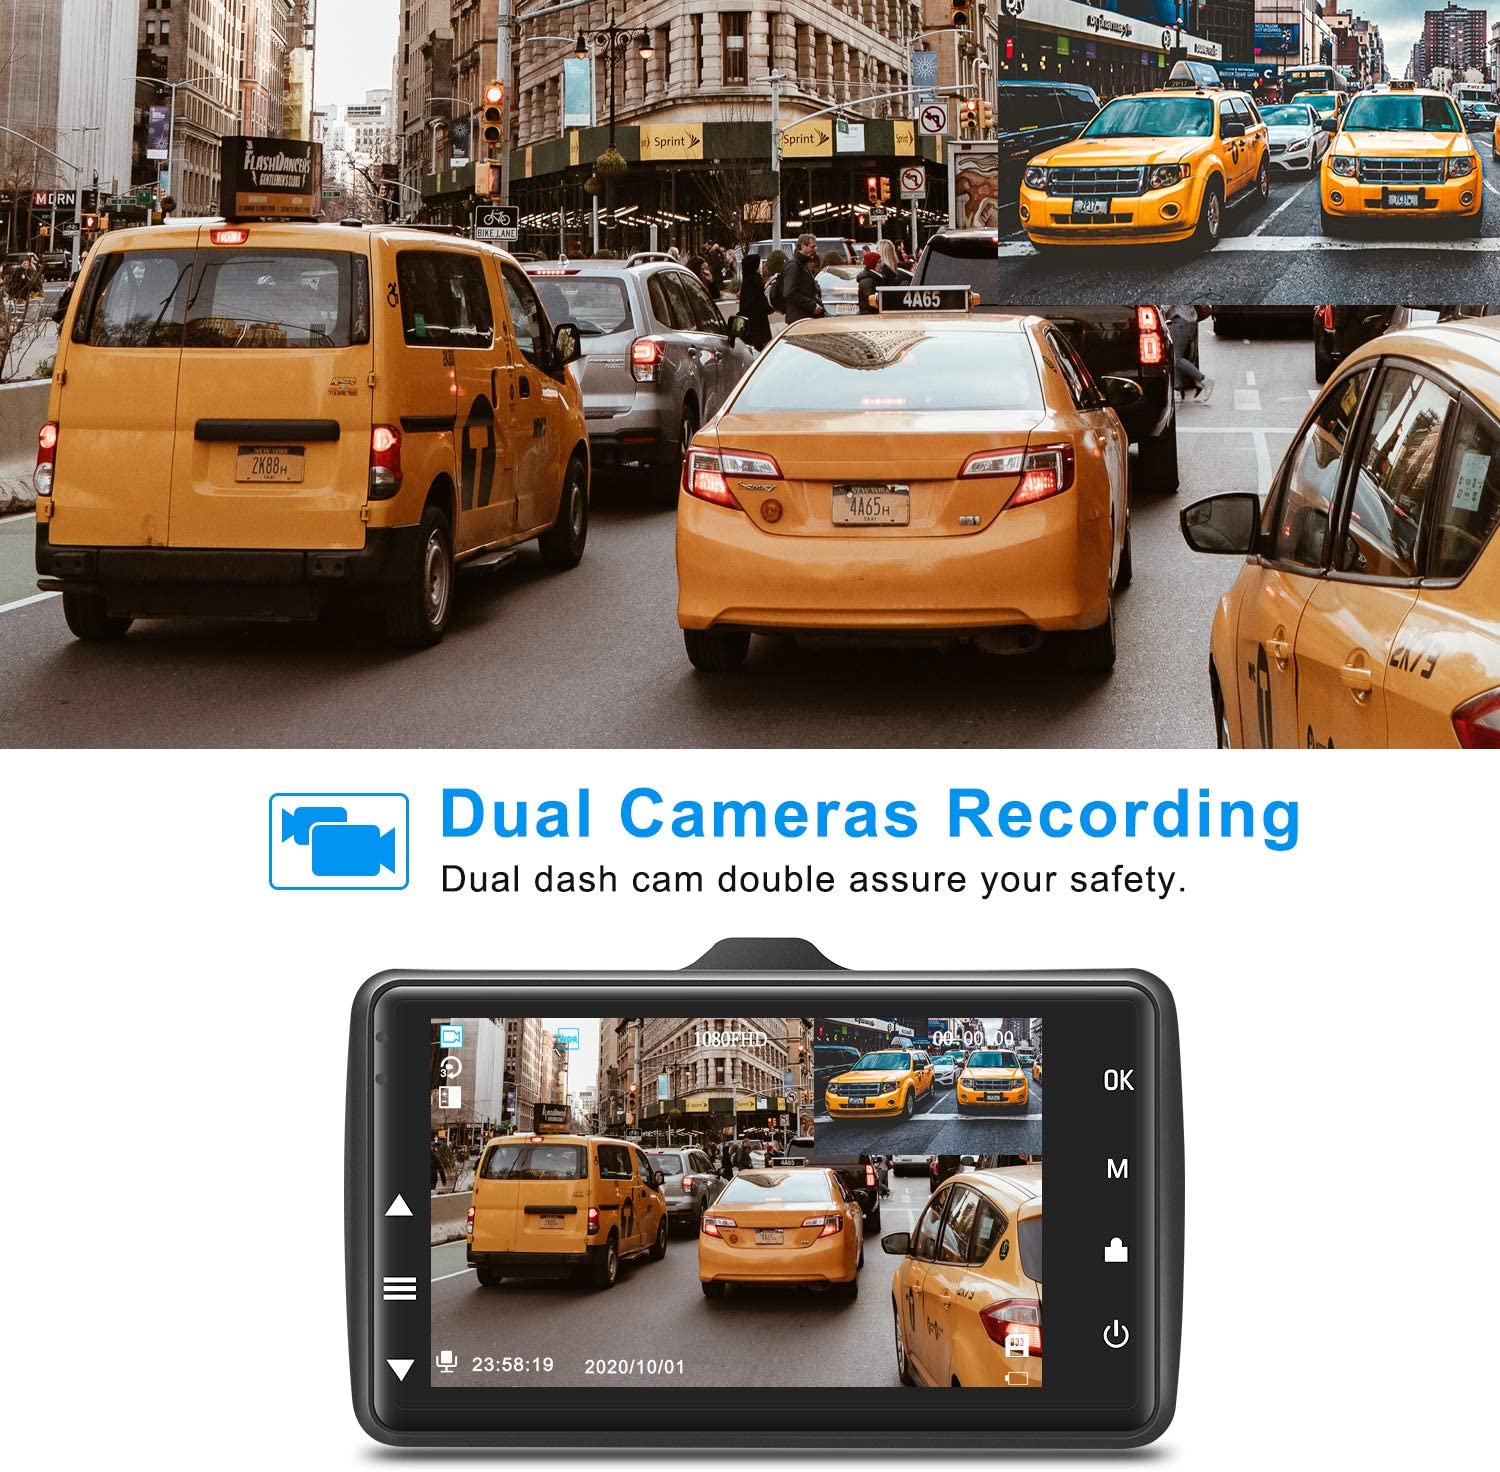 ORSKEY Dash Cam Front and Rear 1080P Full HD Dual Dash Camera in Car Camera  Dashboard Camera Dashcam for Cars 170 Wide Angle with 3.0 LCD Display